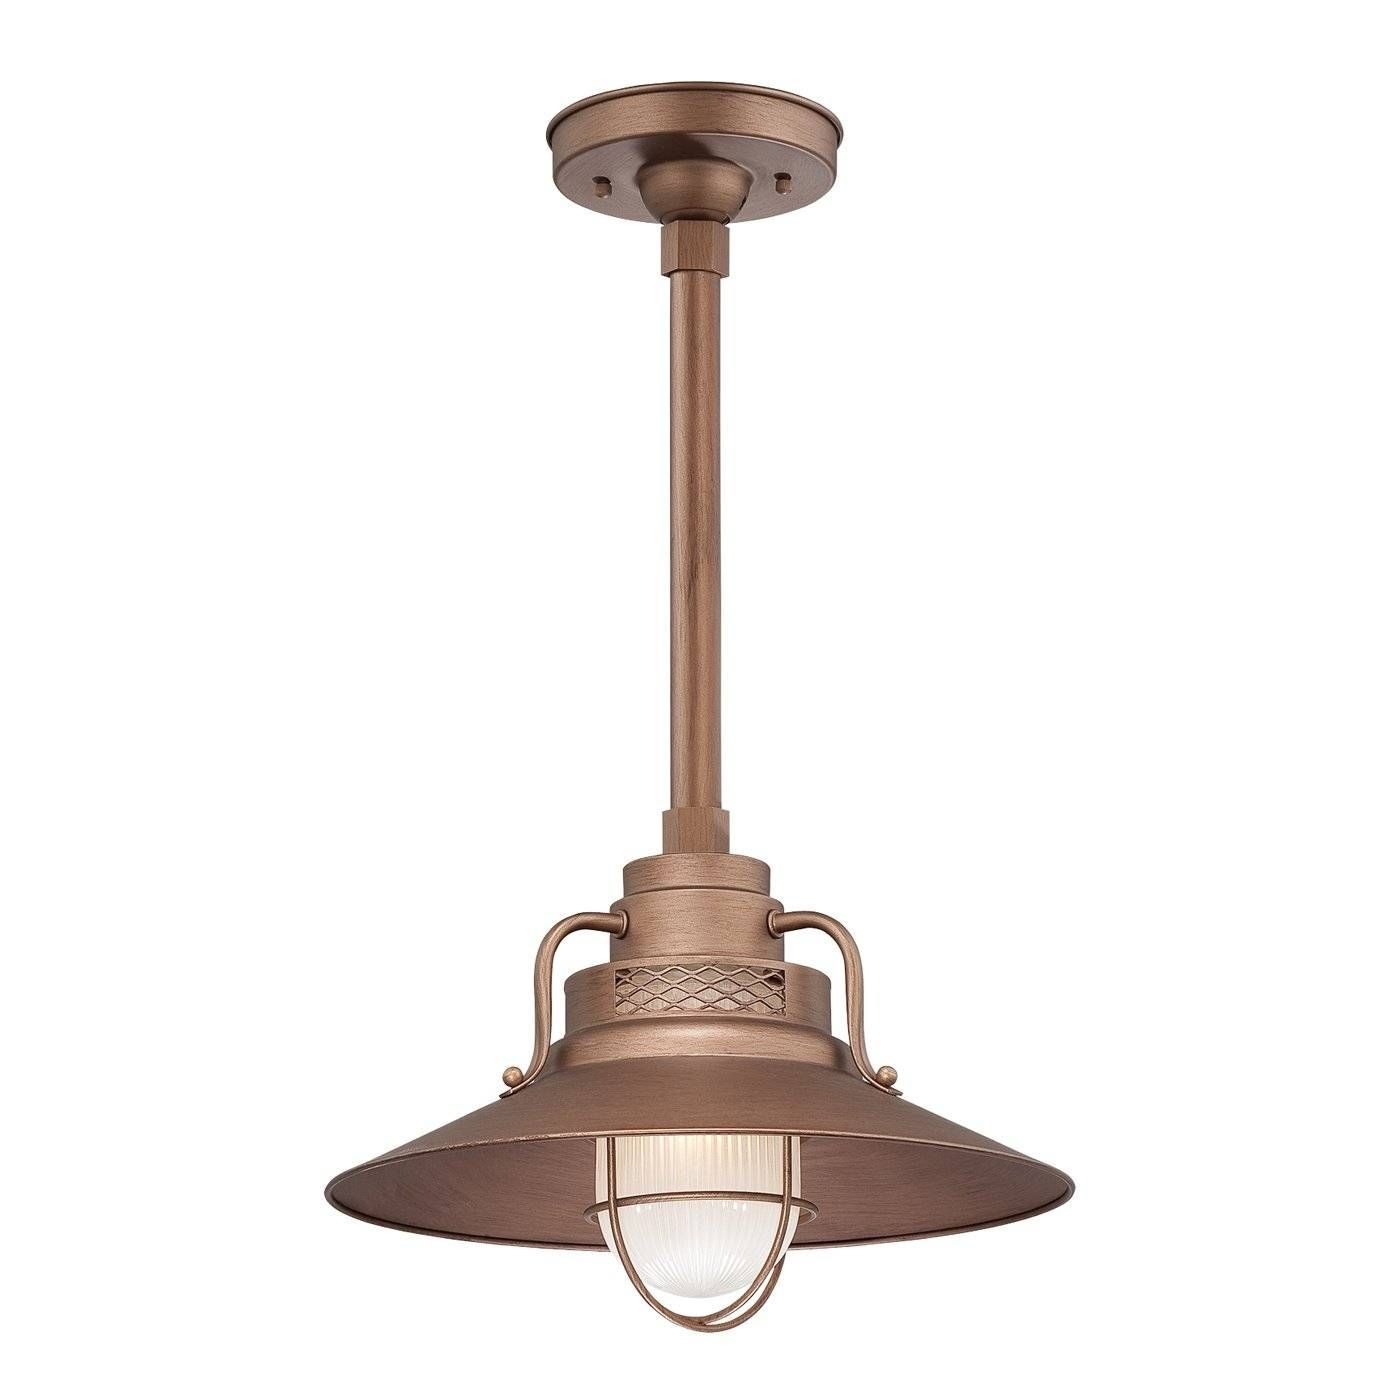 Millennium Lighting Rrrs1 R Series Stem Hung Railroad Shade Large Throughout Railroad Pendant Lights (View 7 of 15)